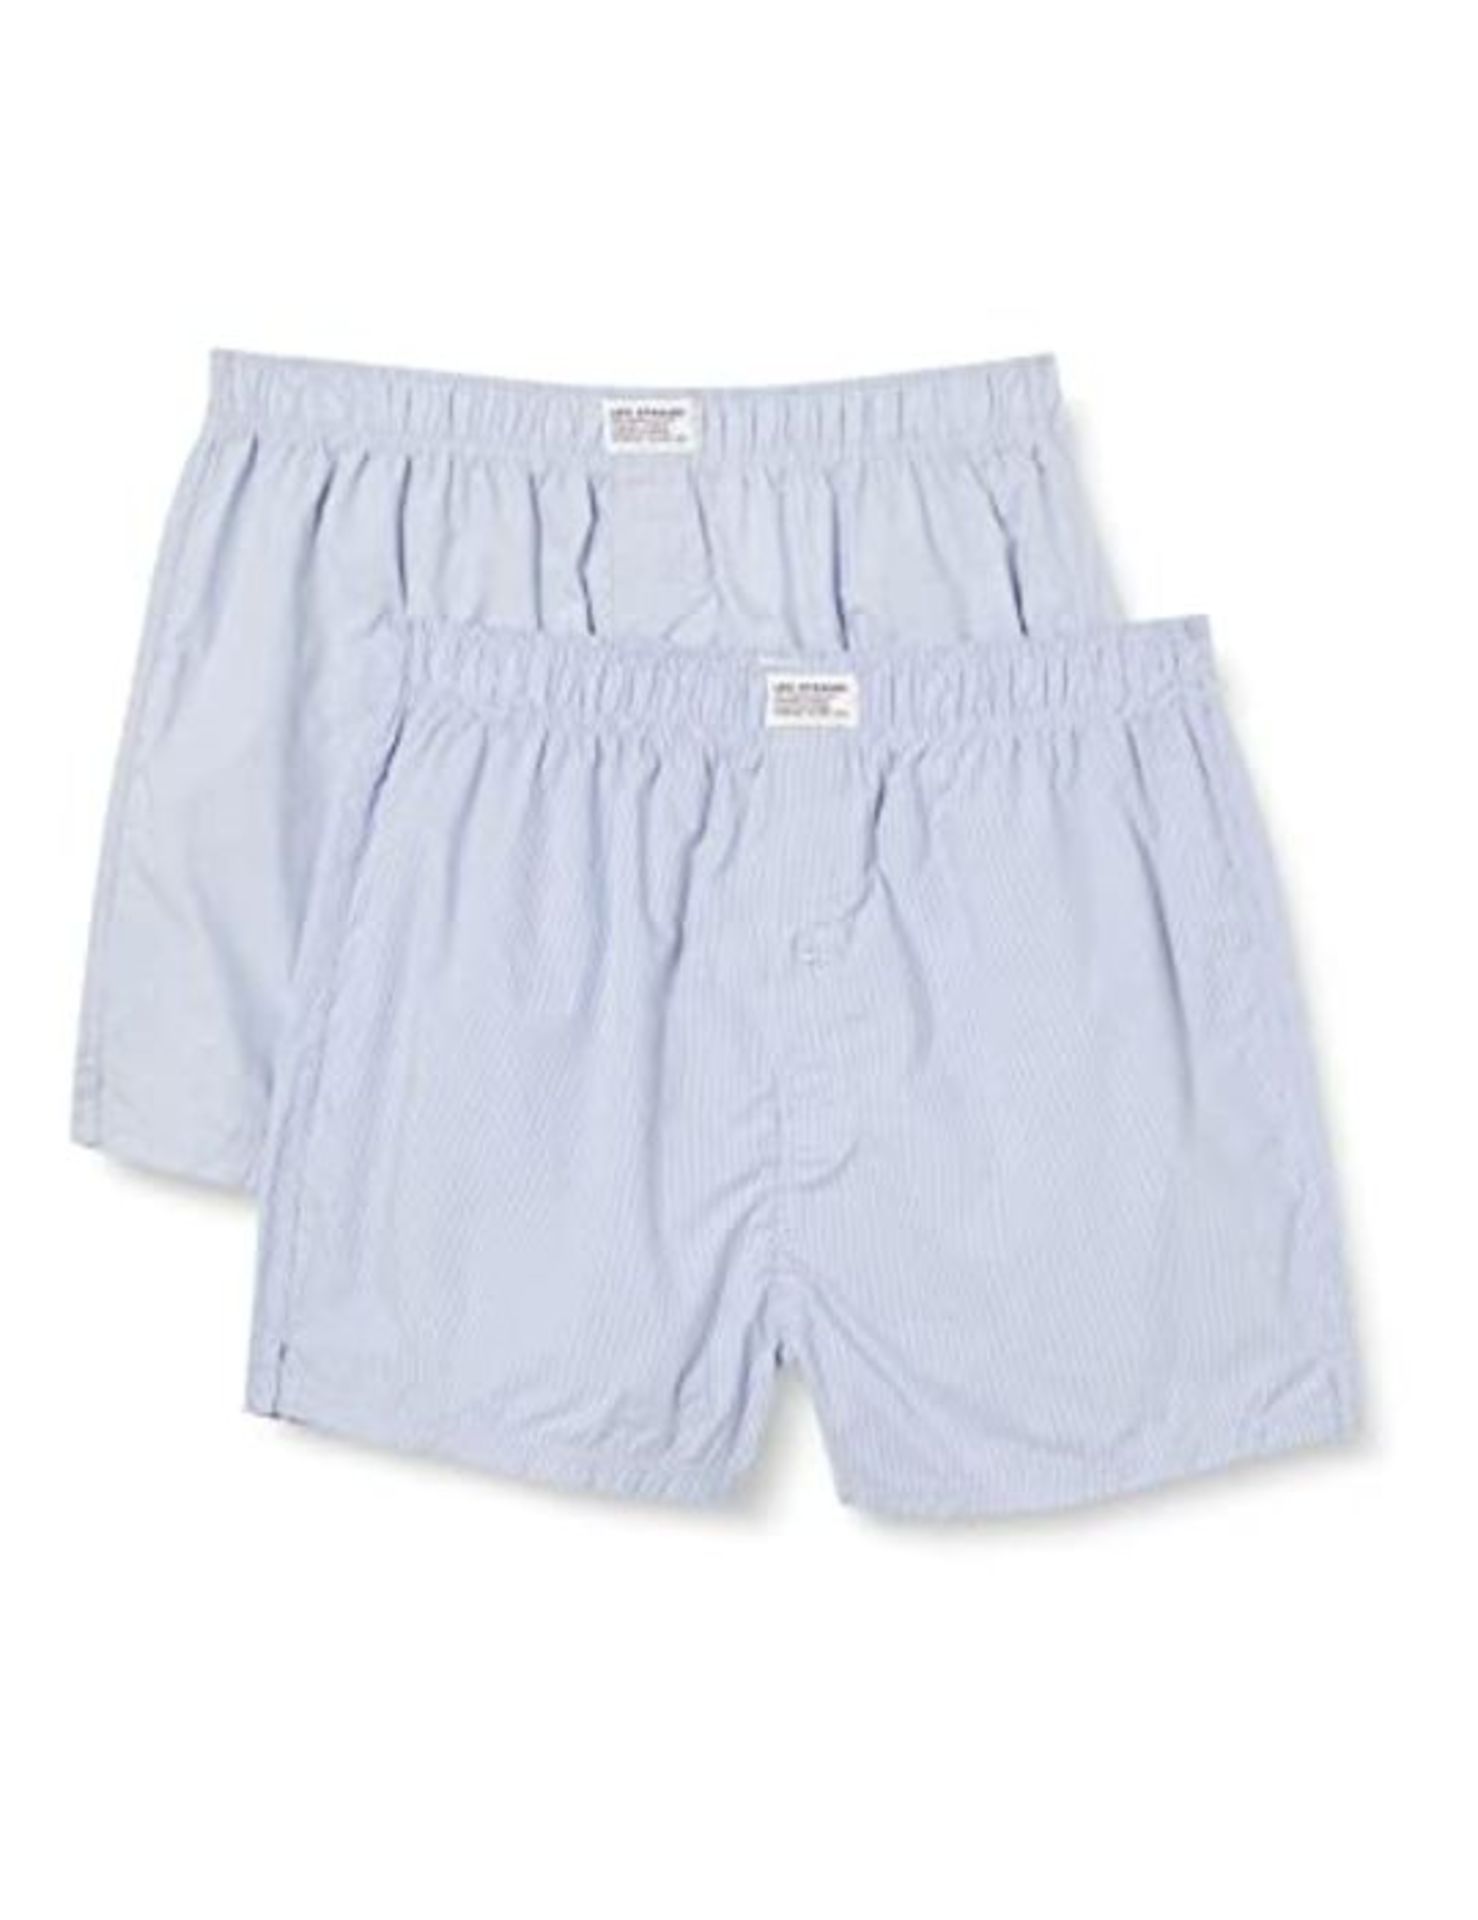 LEVIS Men's Woven Boxer Shorts, Light Blue, Small (Pack of 2)